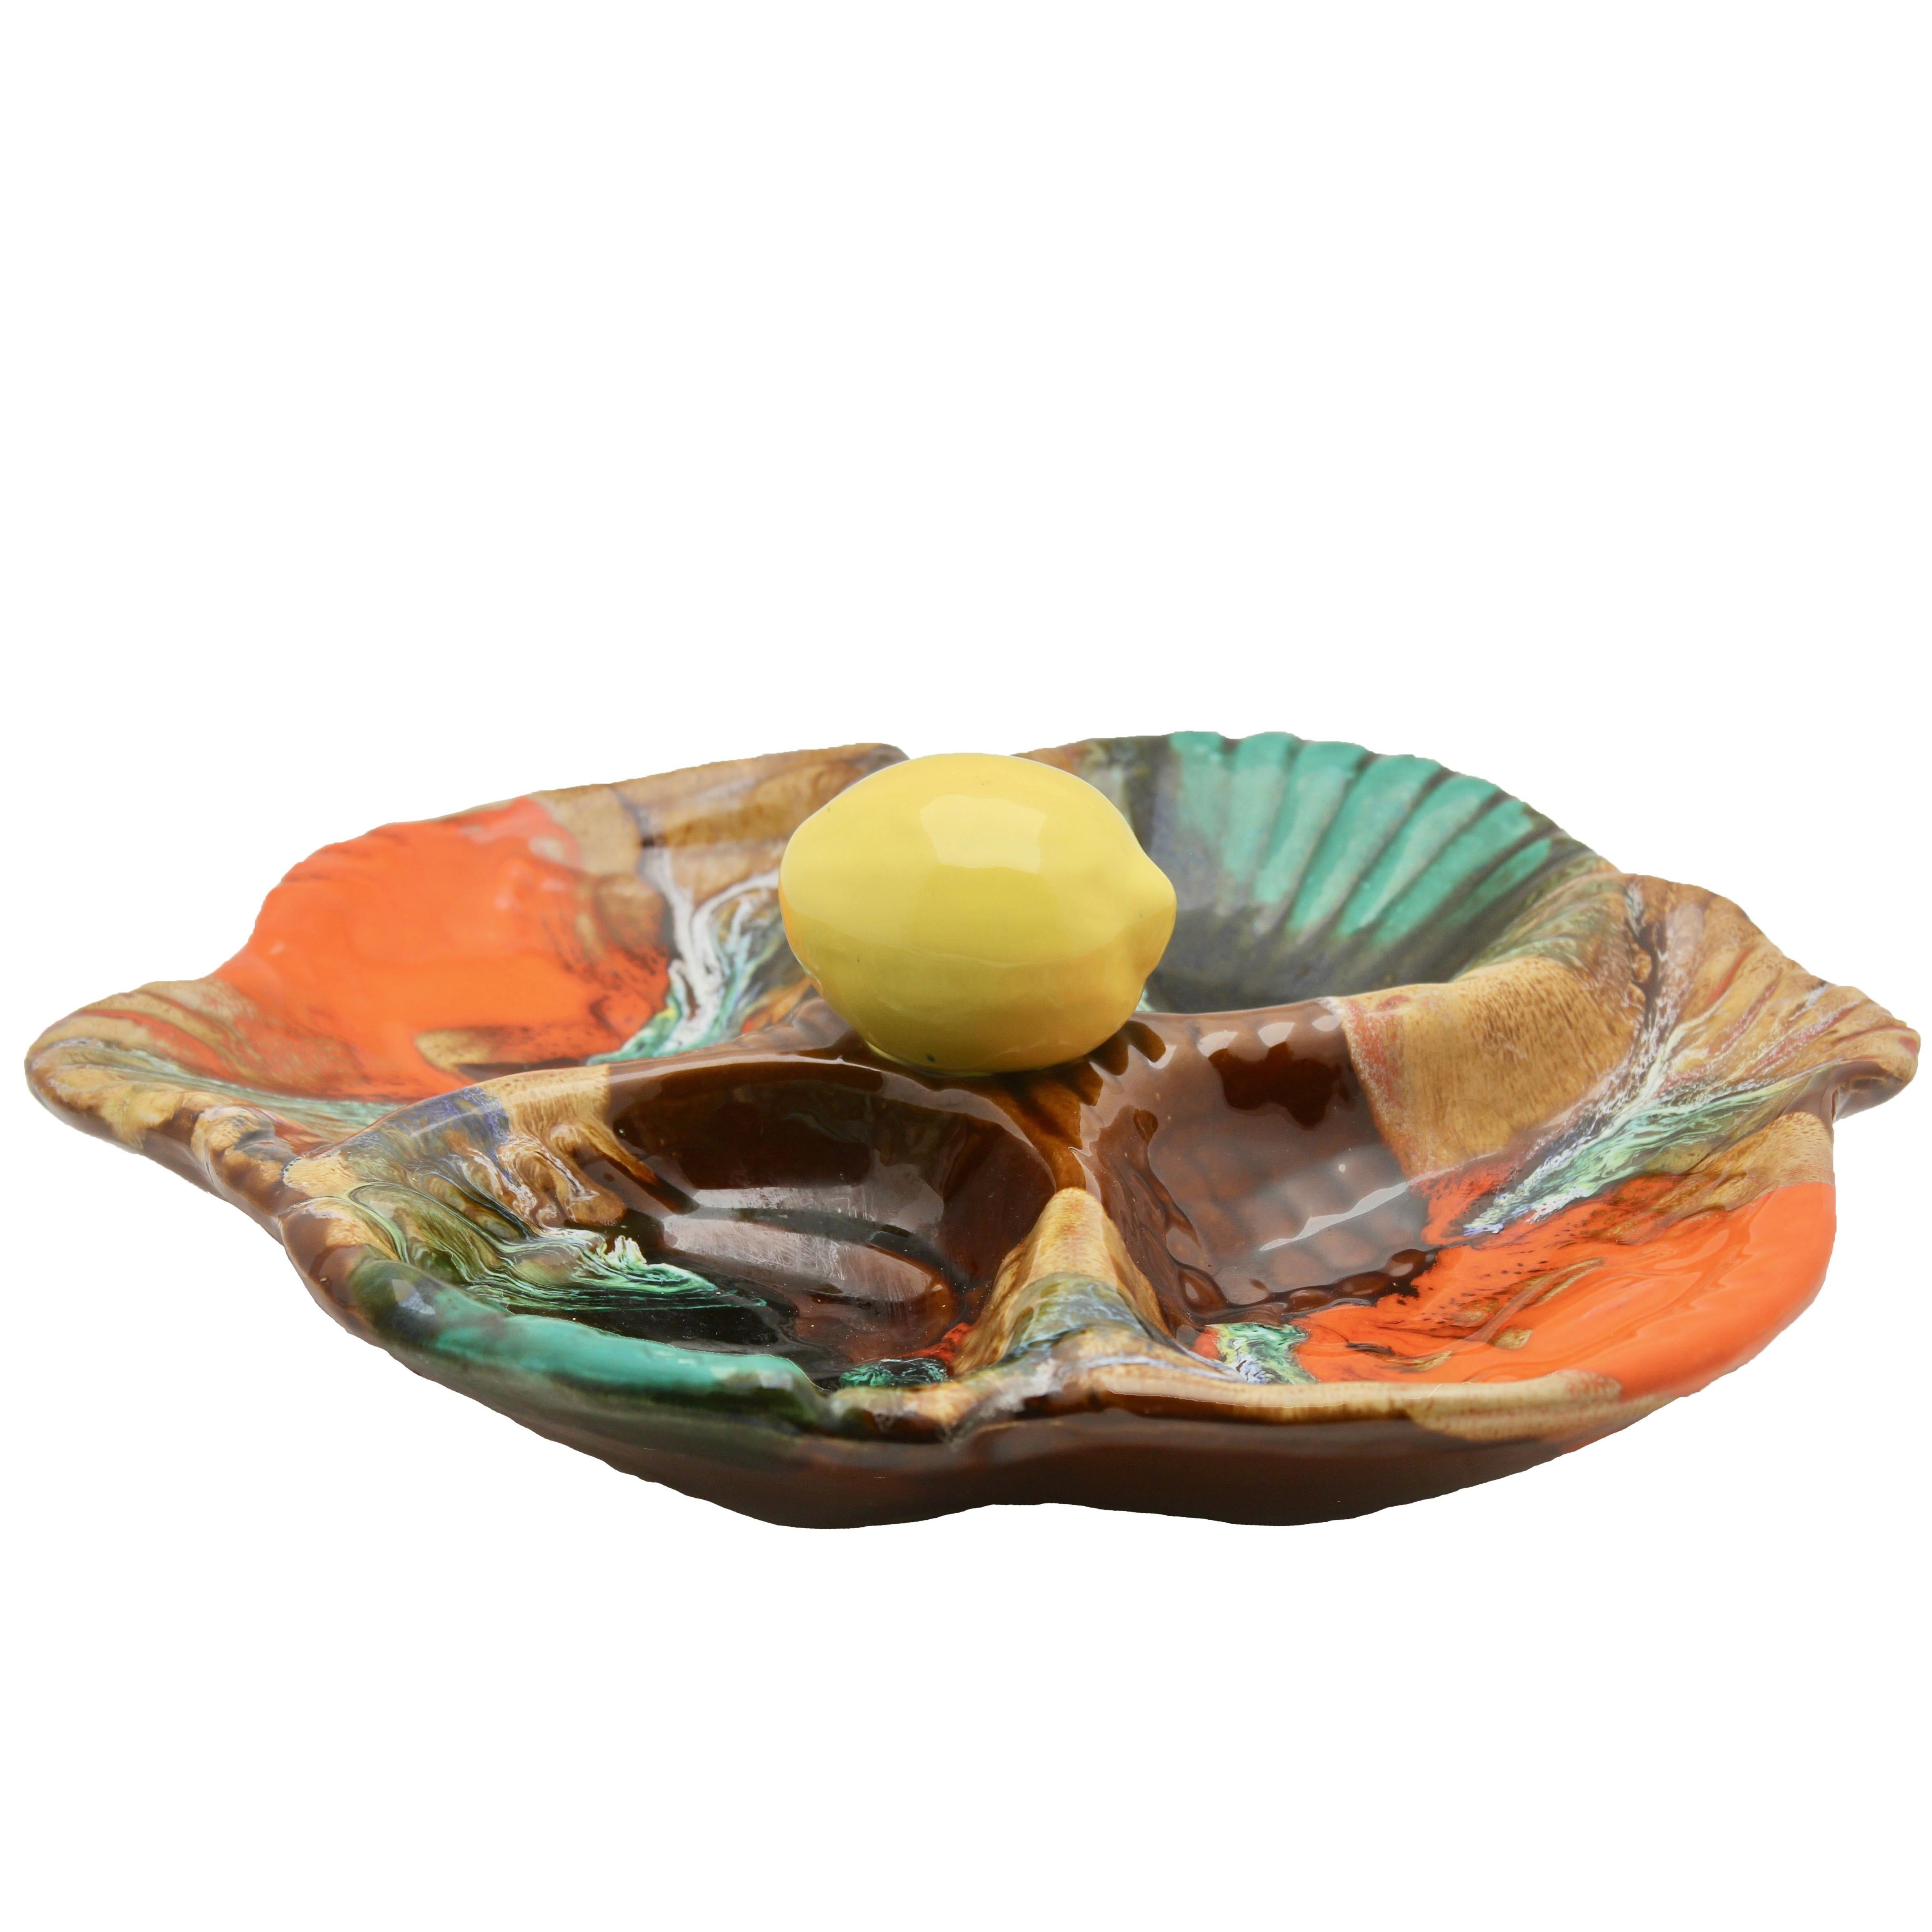 Majolica-style oyster plate or seafood platter by Vallauris Faience with a traditional-style impressed design but a distinctly midcentury decor of 'fat-lava' glazes.

The earthenware shape underneath the glazes shows a typical impressed design of